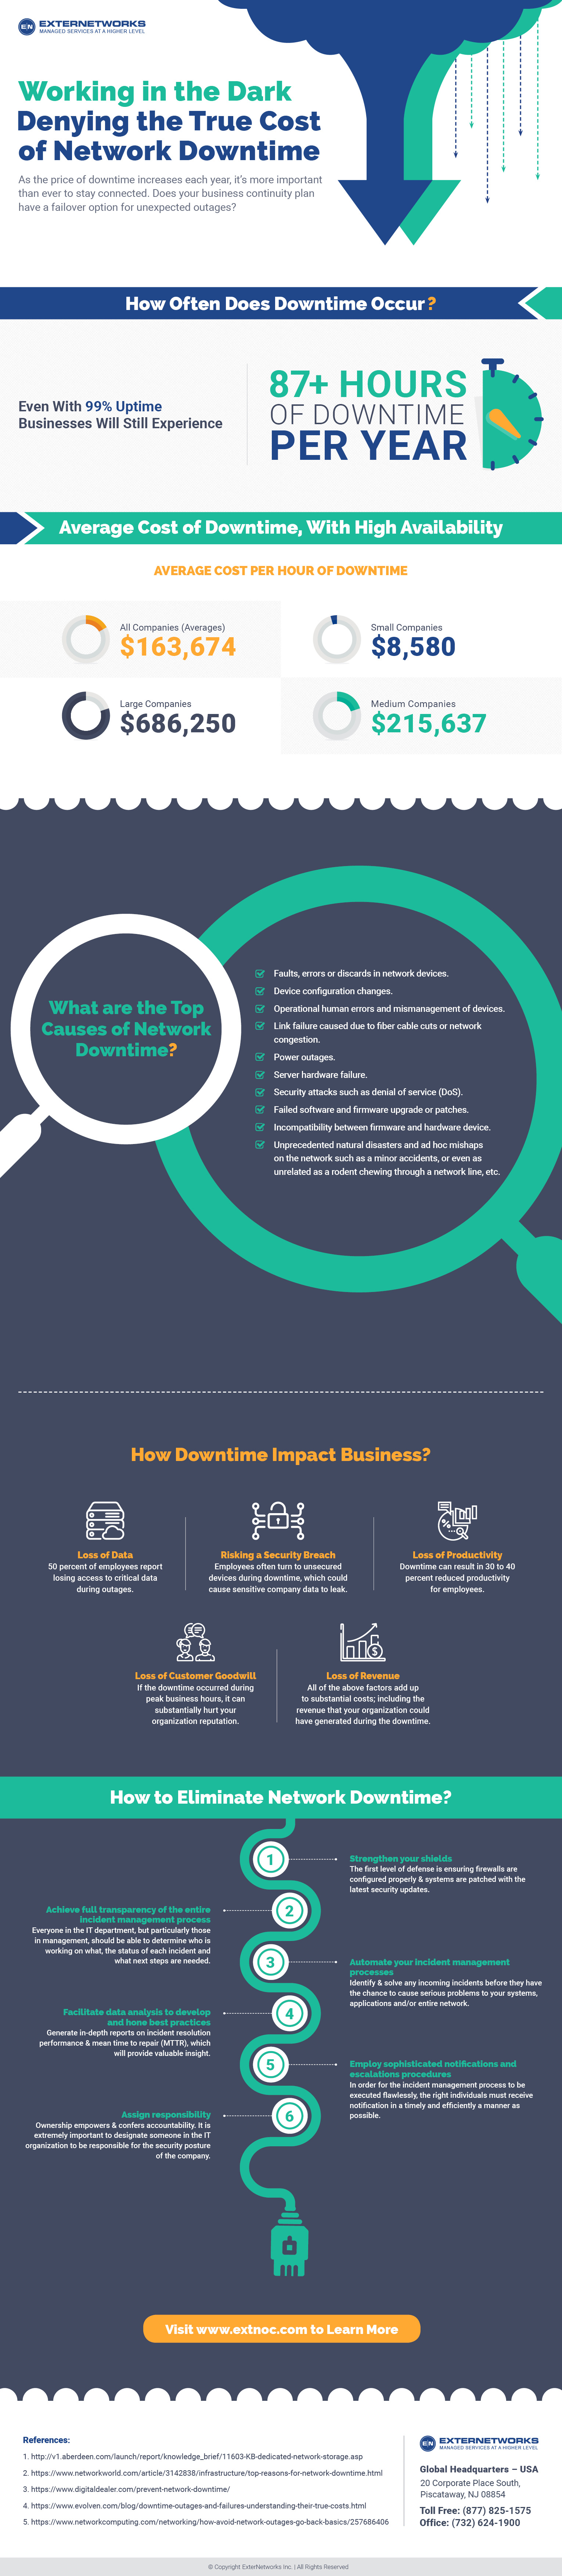 Network Downtime Infogrpahic